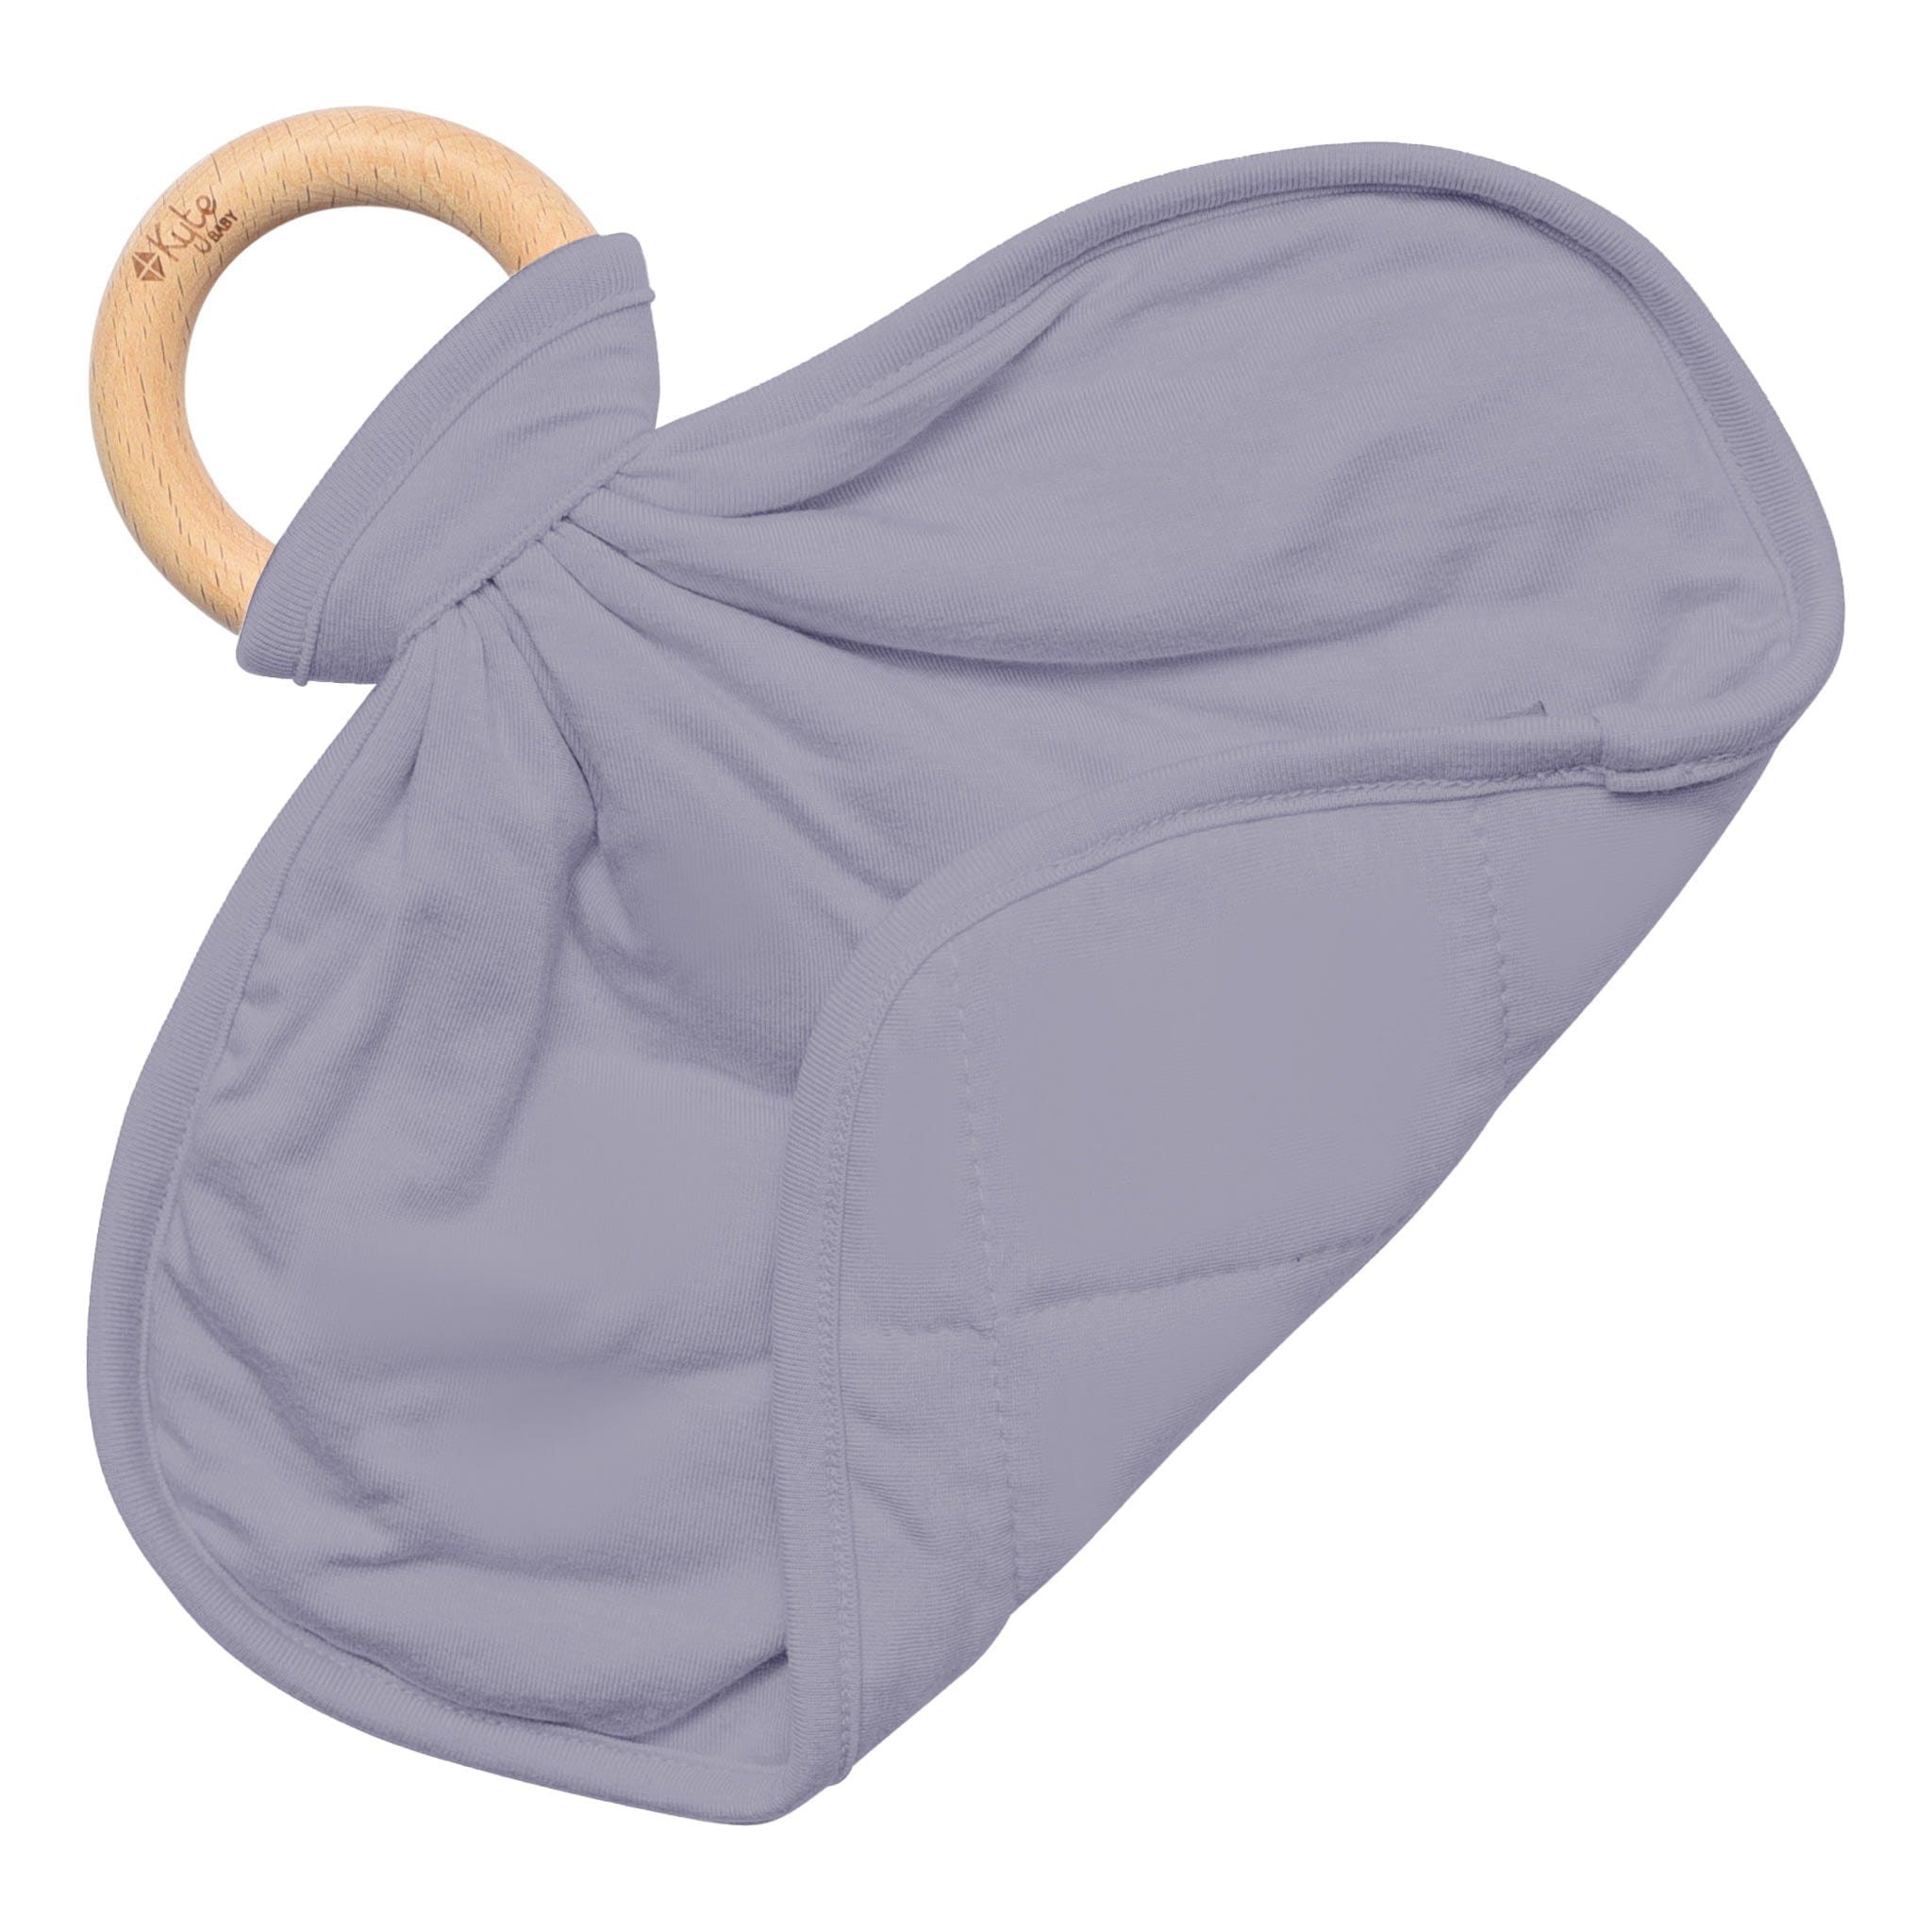 Kyte Baby Lovey Haze / Infant Lovey in Haze with Removable Teething Ring